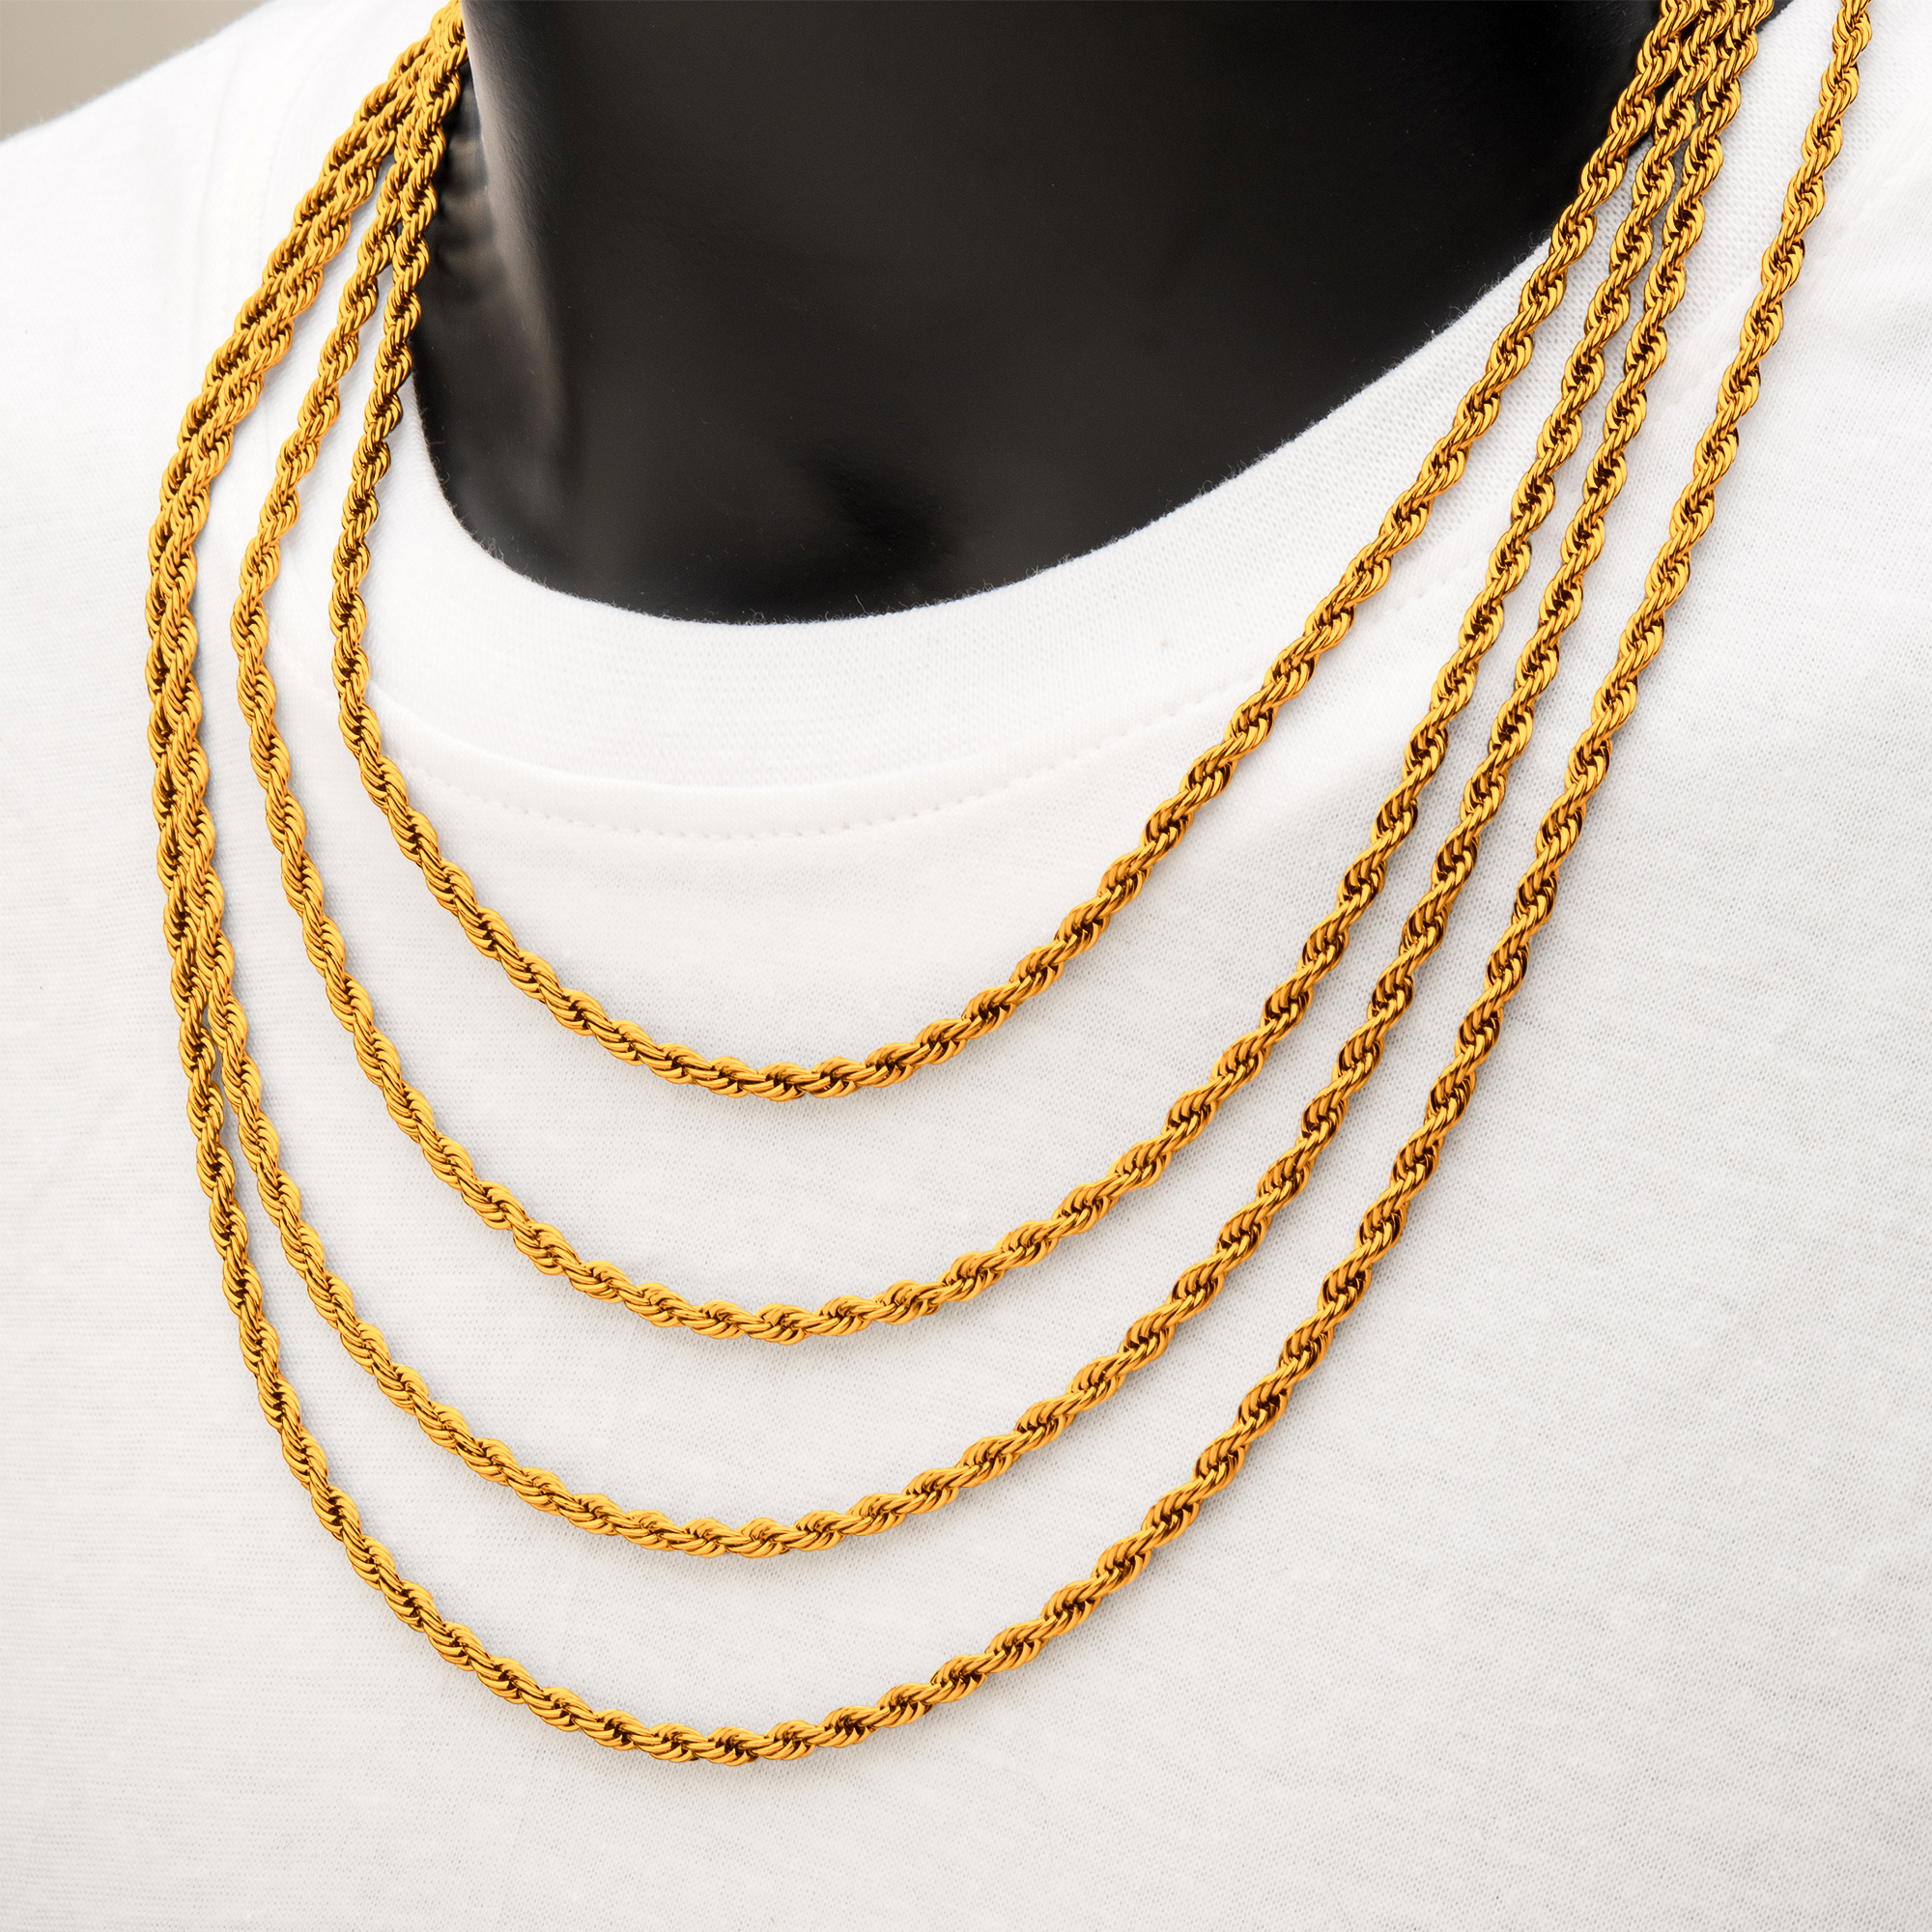 4mm 18K Gold Plated Rope Chain Image 3 P.K. Bennett Jewelers Mundelein, IL